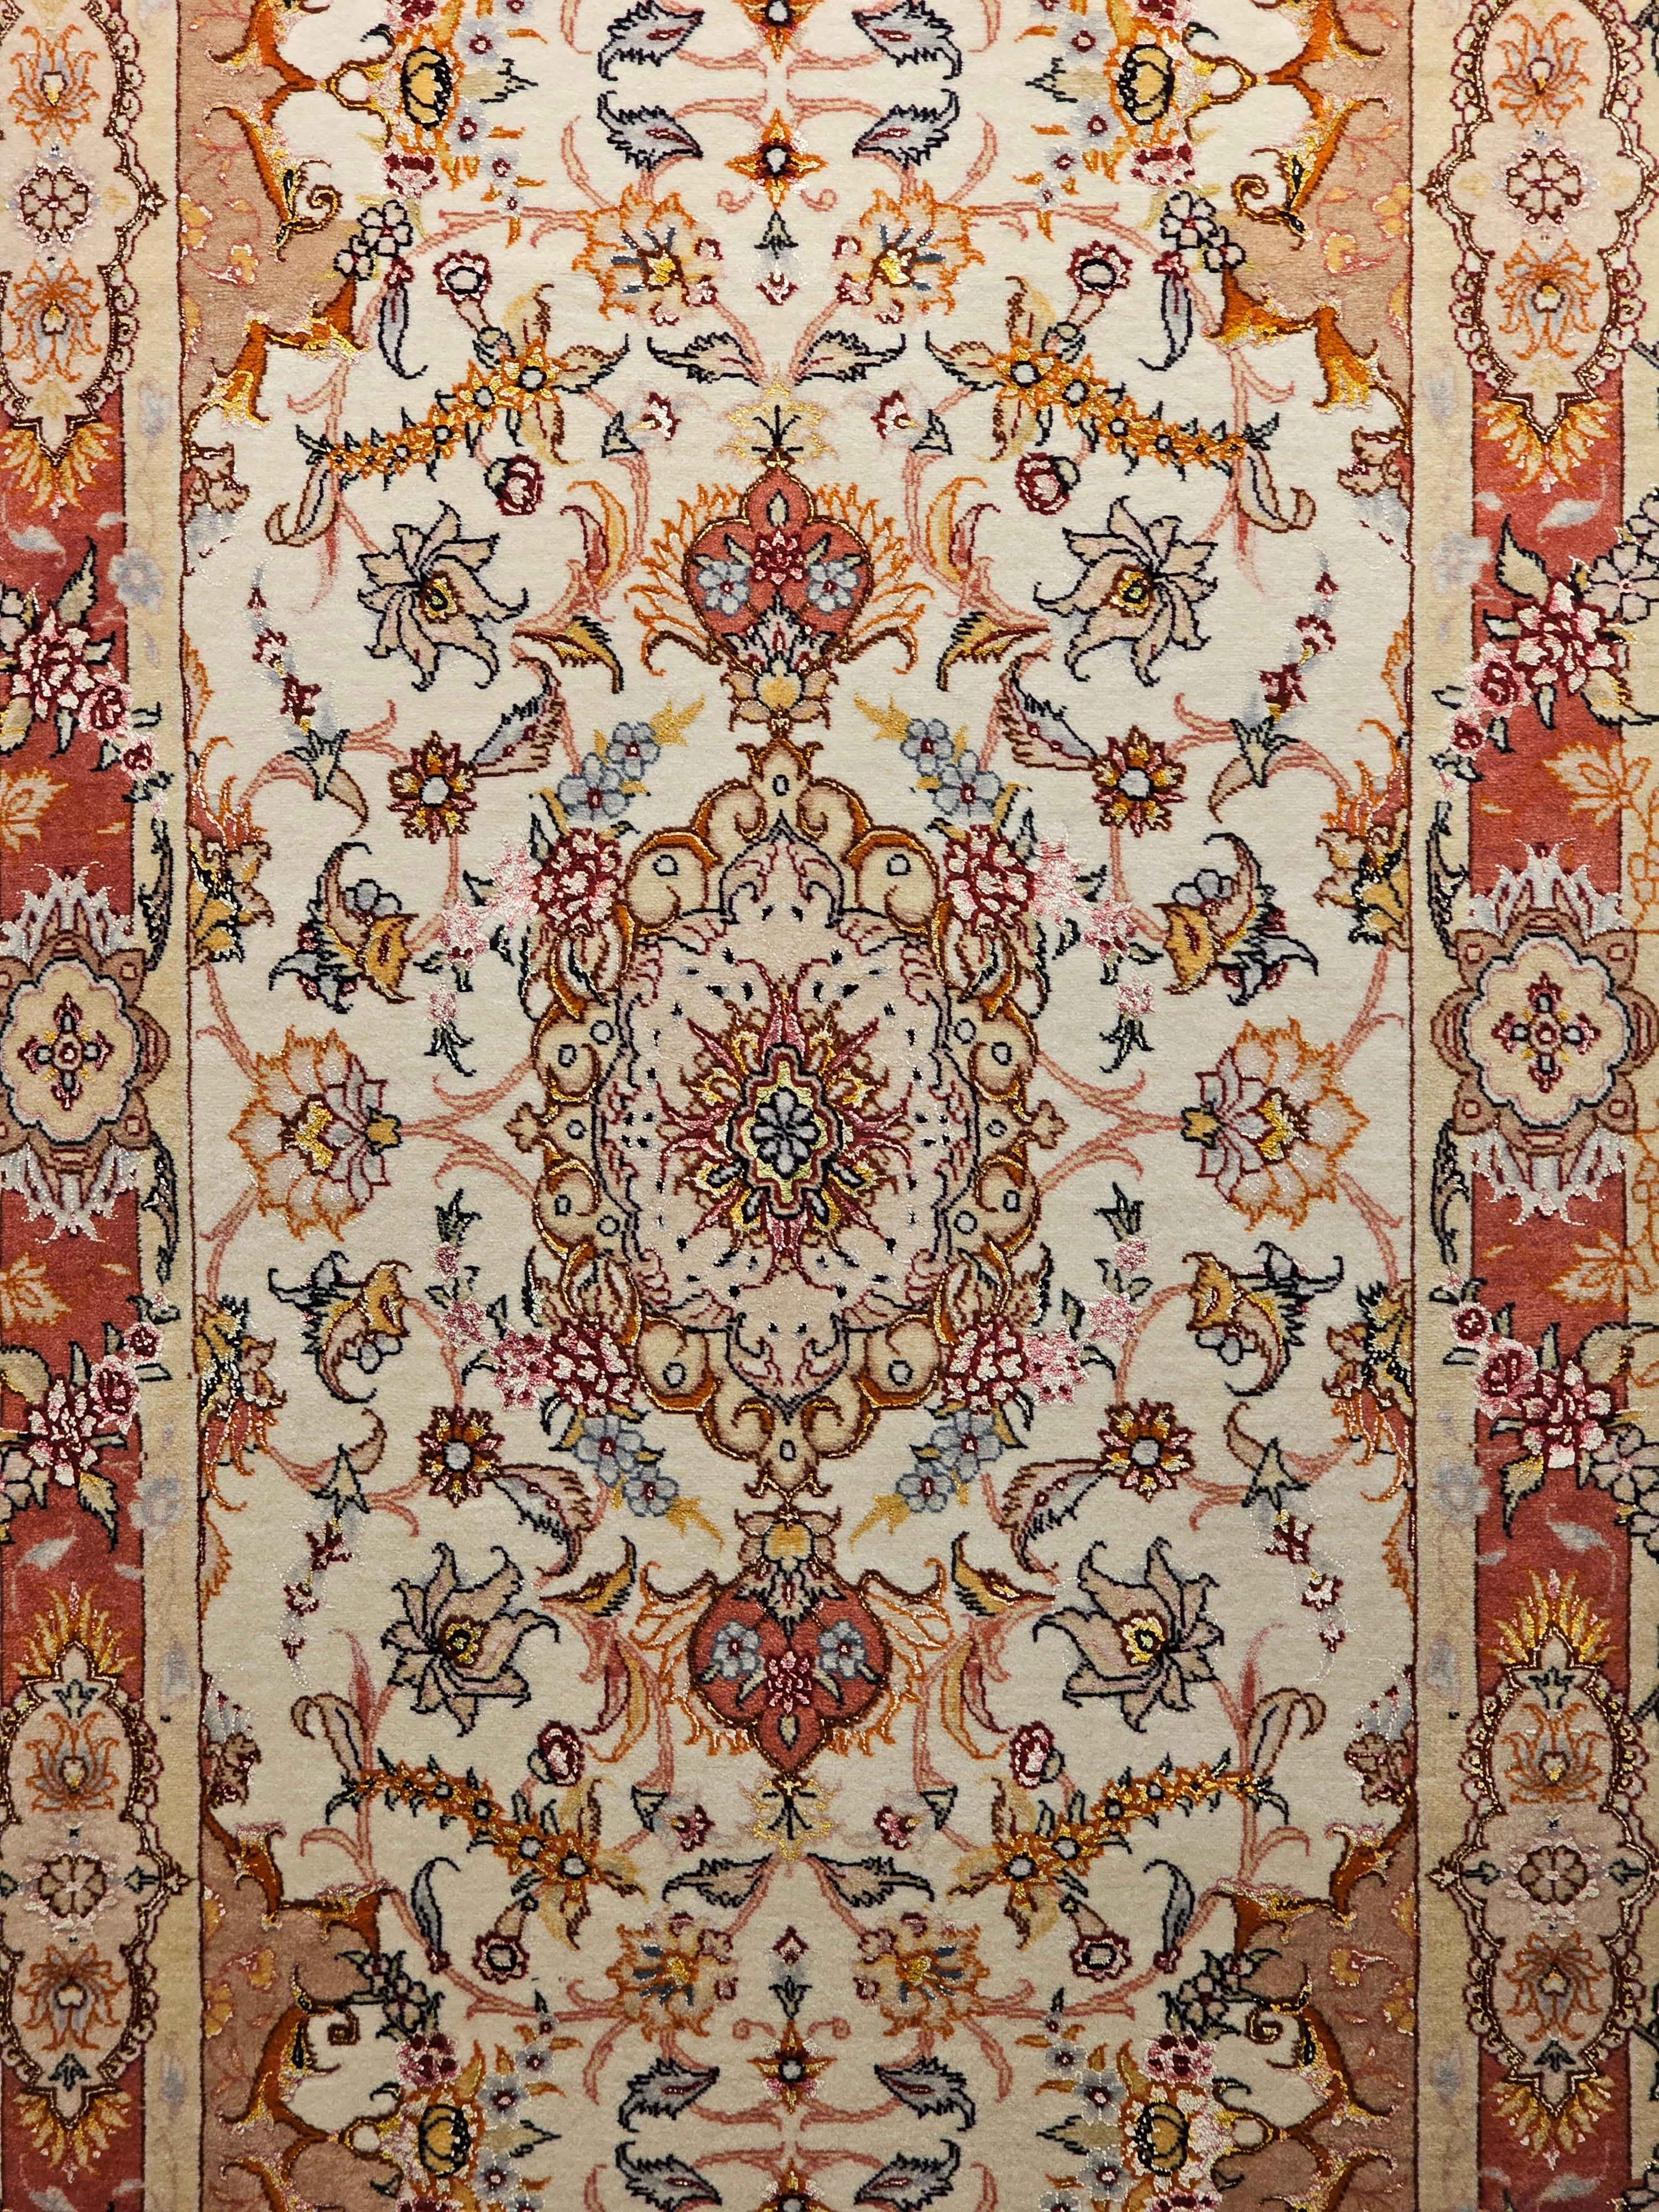 The Tabriz runner with a floral design has a wool pile on a cotton foundation with silk highlights.  It has an excellent weave in a cream color field and a red border. The use of silk to highlight the flowers provides a shimmering effect when the